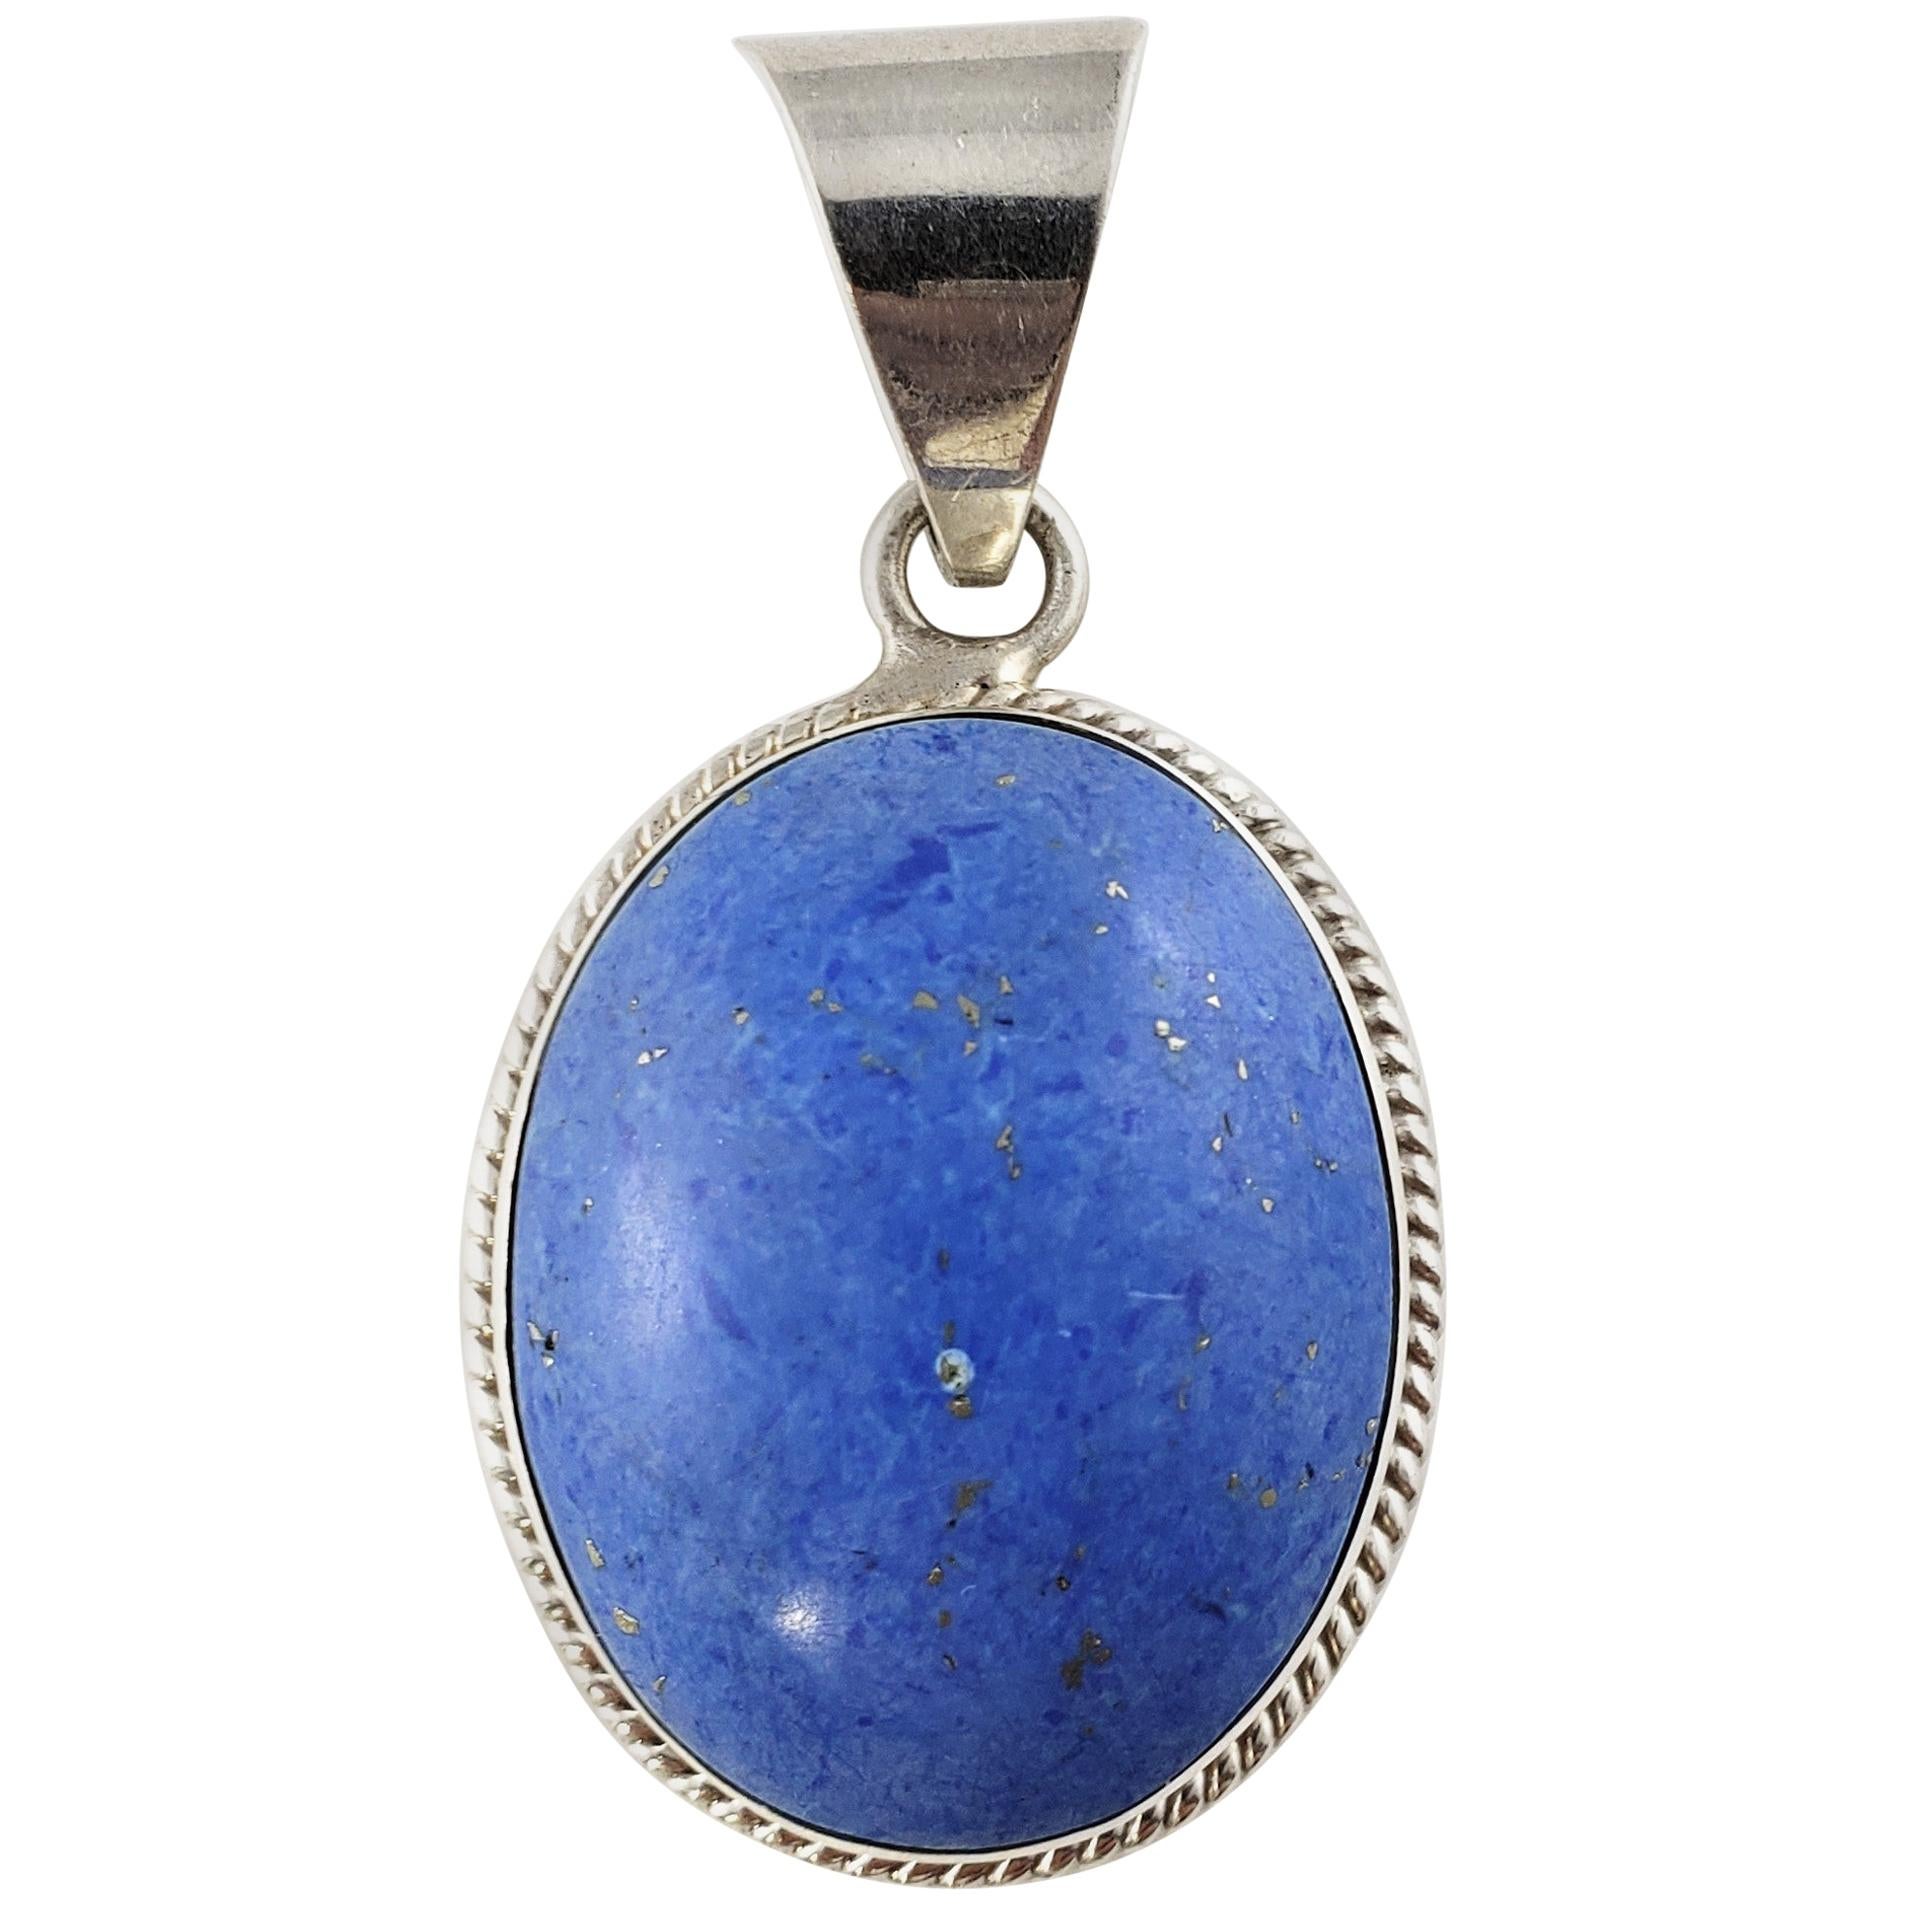 Taxco Mexico TM-287 Sterling Silver and Denim Lapis Pendant